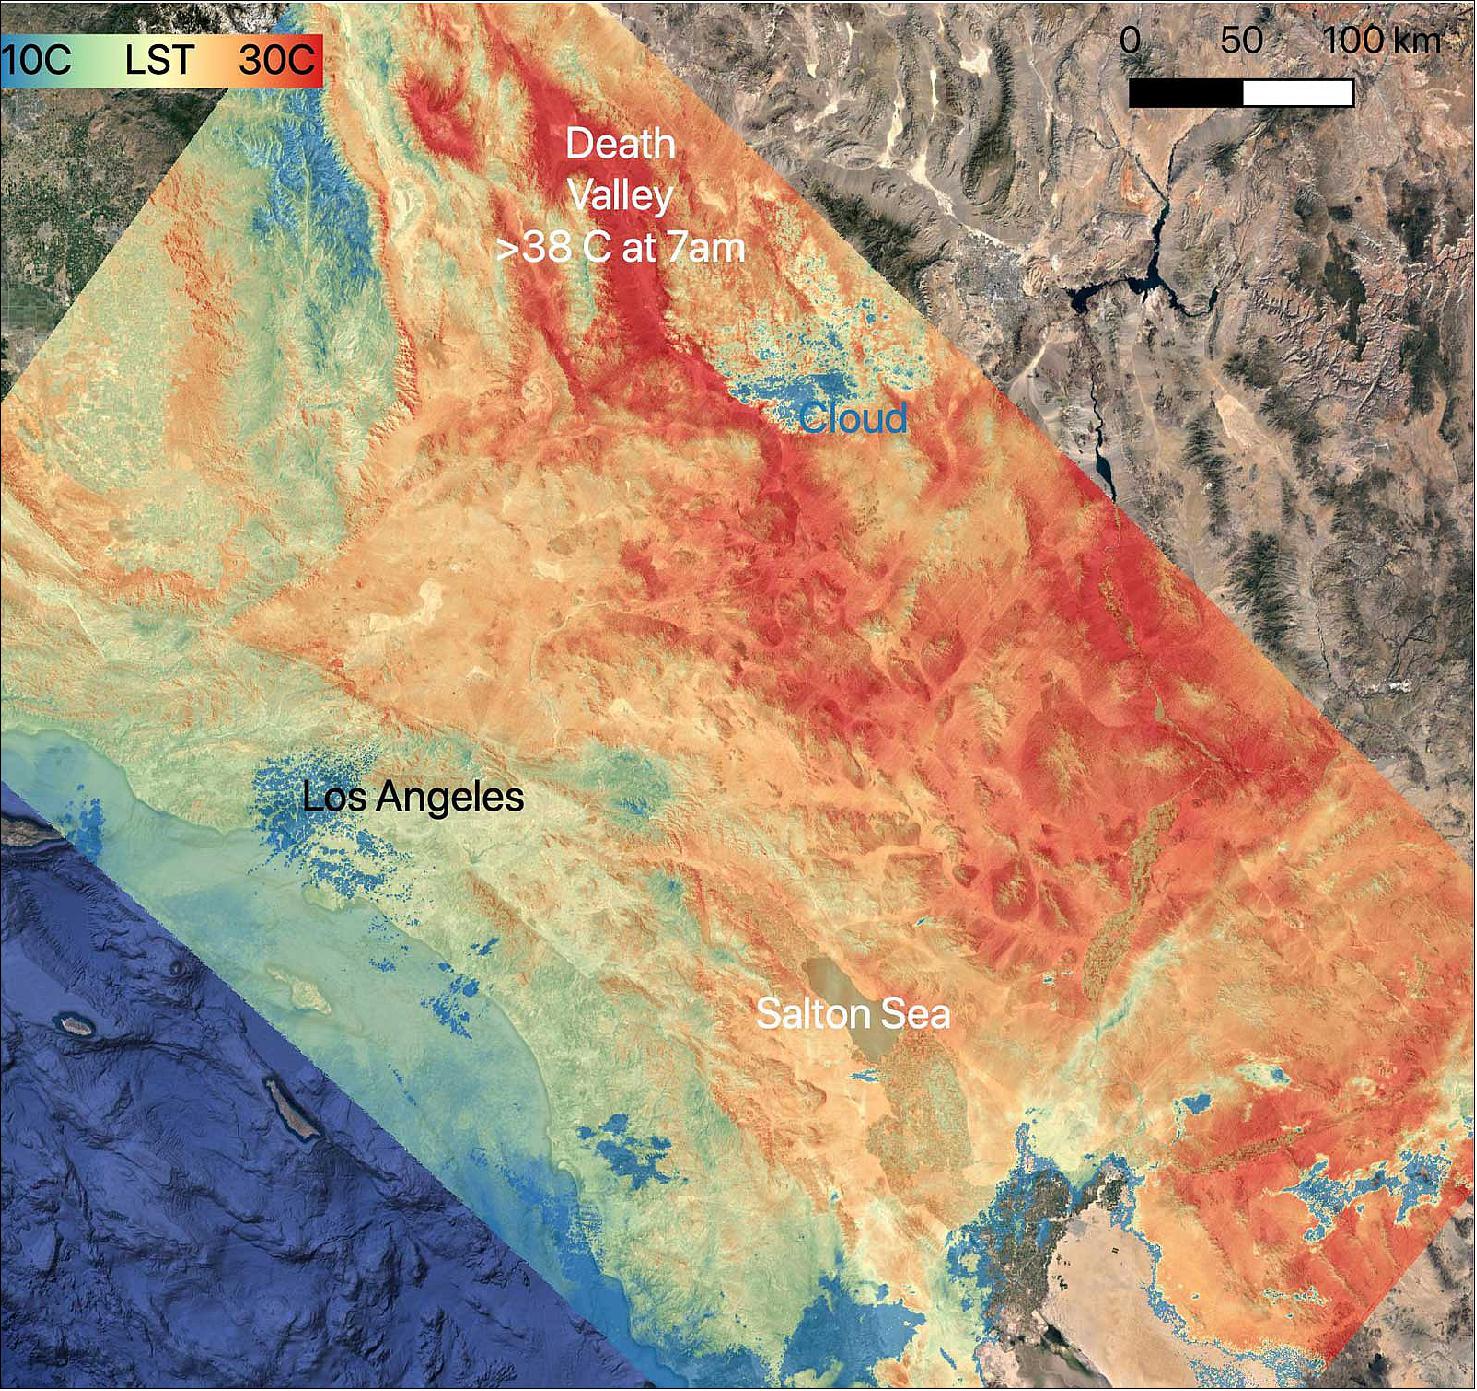 Figure 30: On July 8, 2021, NASA’s ECOSTRESS instrument, aboard the space station captured ground surface temperature data over California. Areas in red – including Death Valley – had surpassed 86 degrees Fahrenheit by 7 a.m. local time, well above average ground surface temperatures for the area (image credit: NASA/JPL-Caltech)